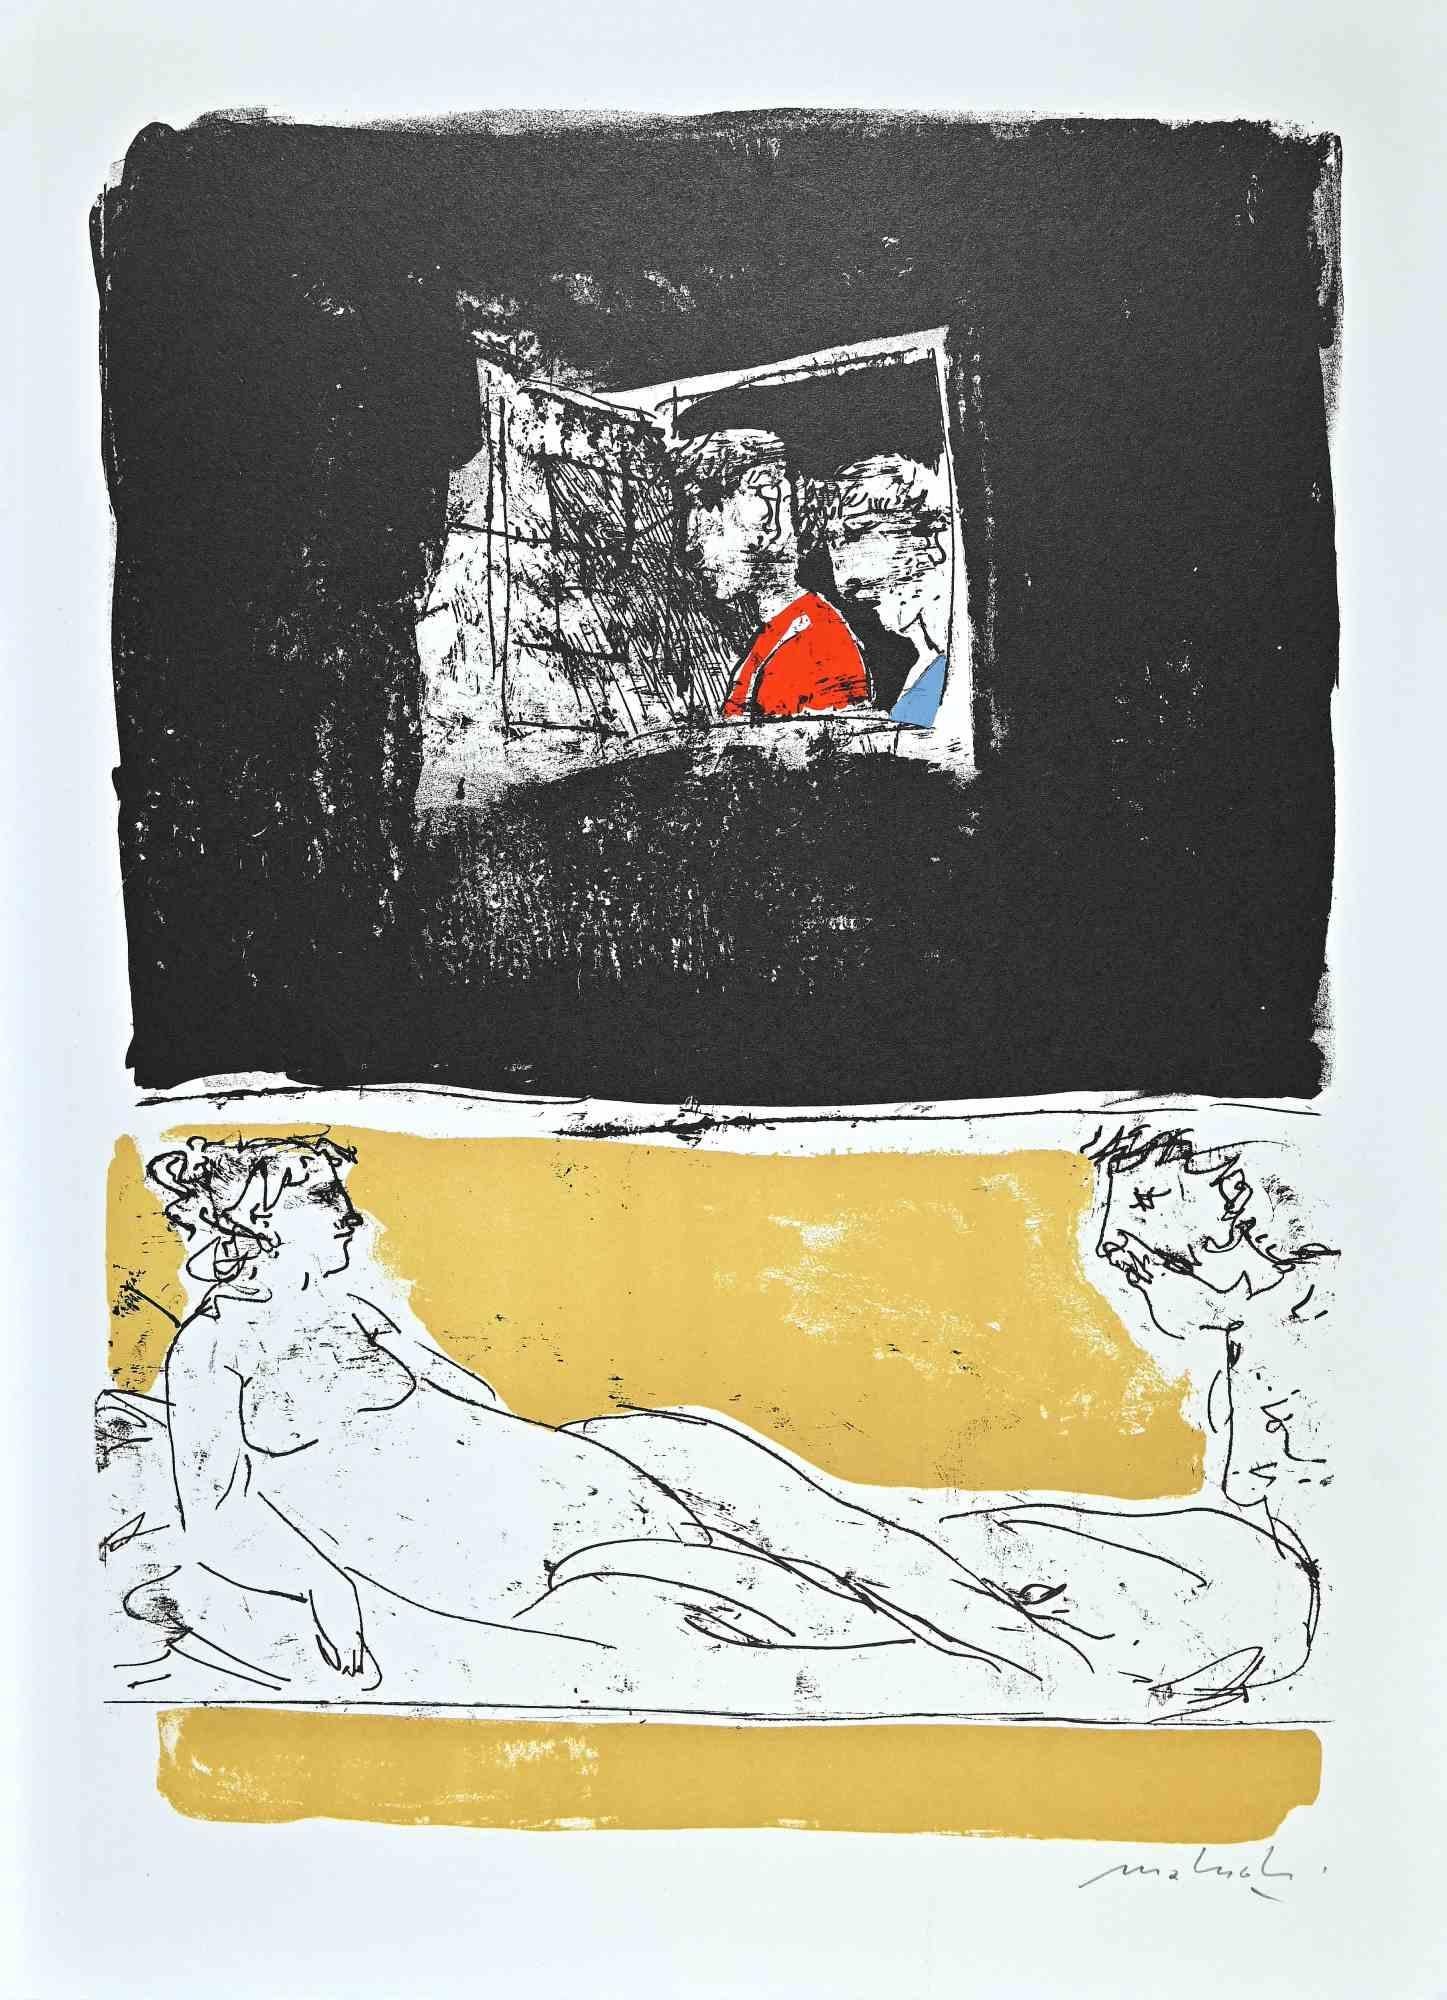 The Nude and Gazing through Window is the original etching and aquatint on paper realised by  Carlo Mattioli in 1970s.

Hand-signed on the lower.

Very good conditions.

The artwork is expressed through deft strokes with minimalistic colors applying